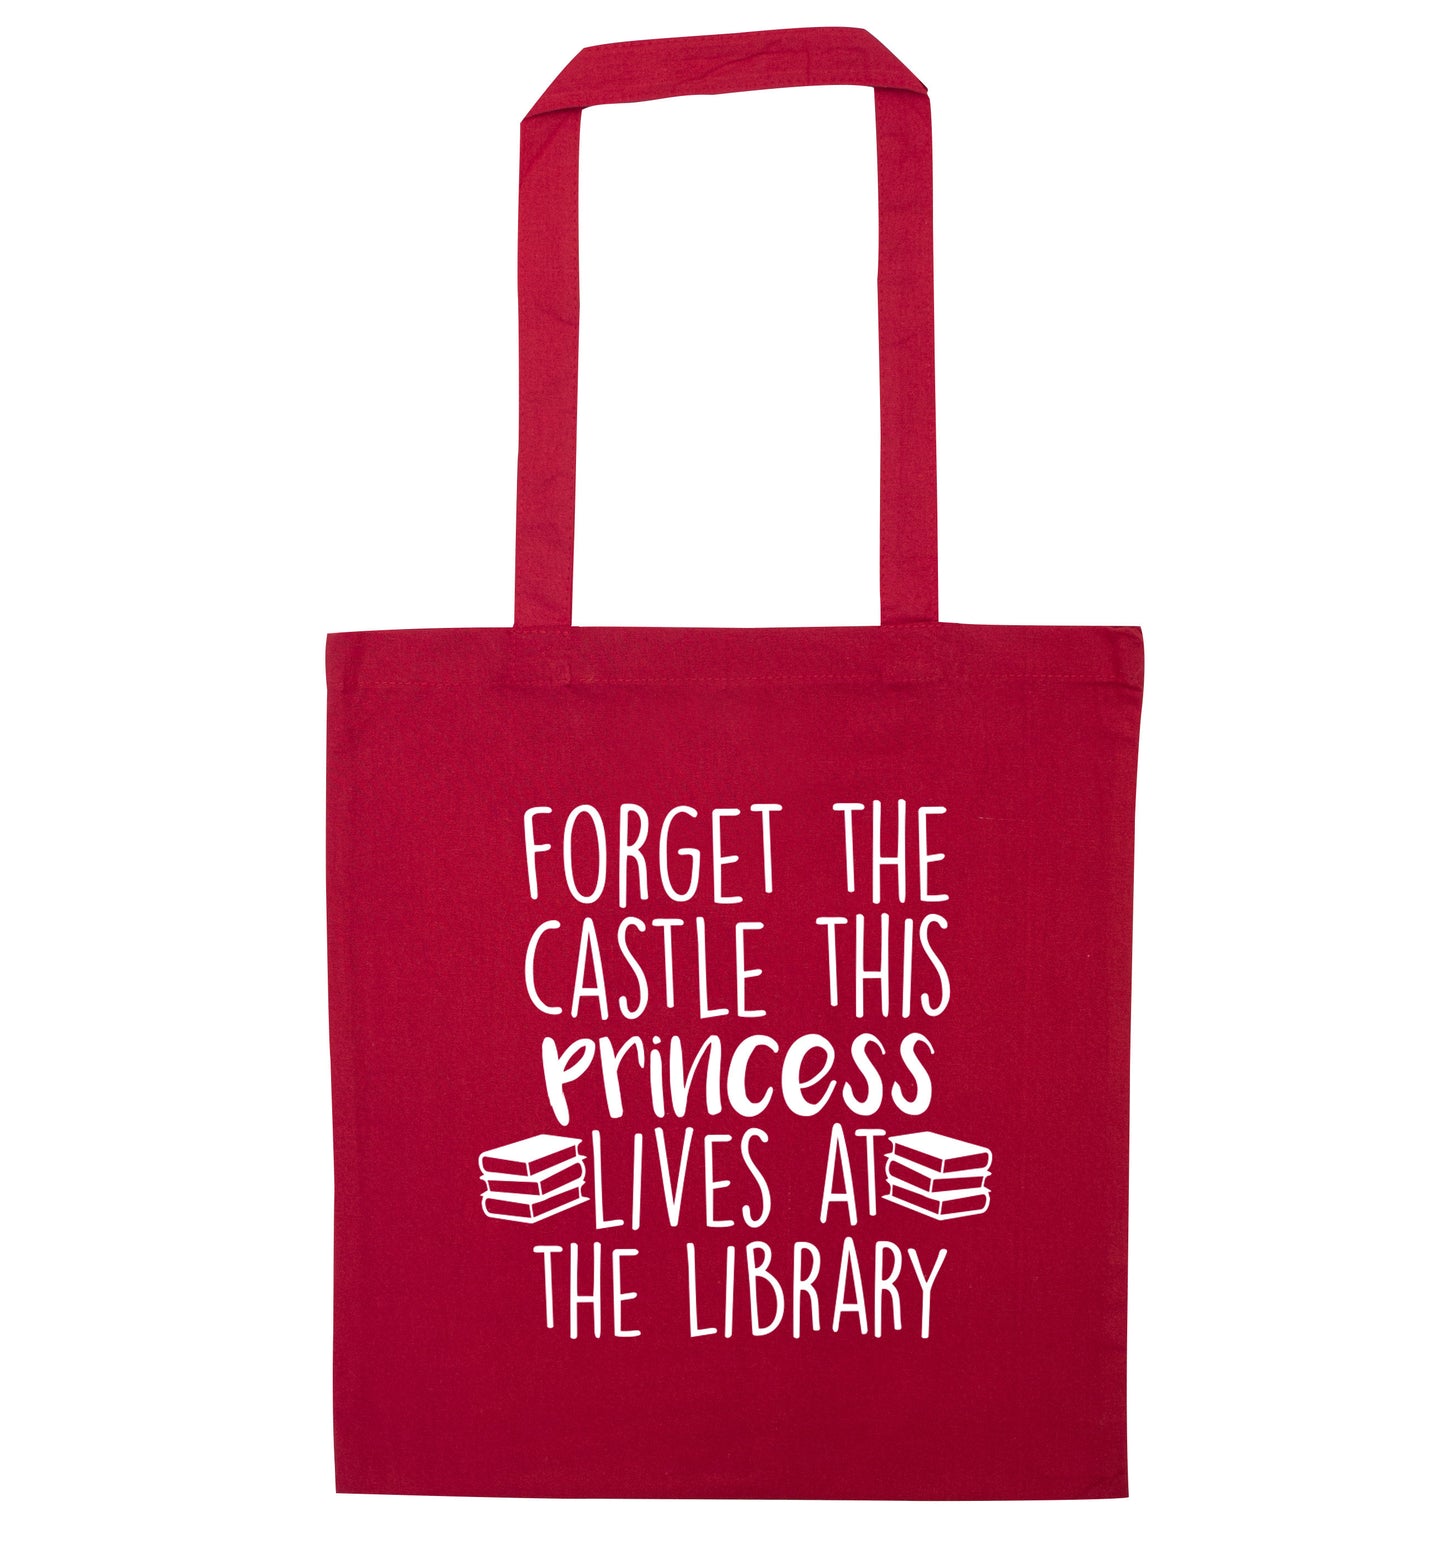 Forget the castle this princess lives at the library red tote bag